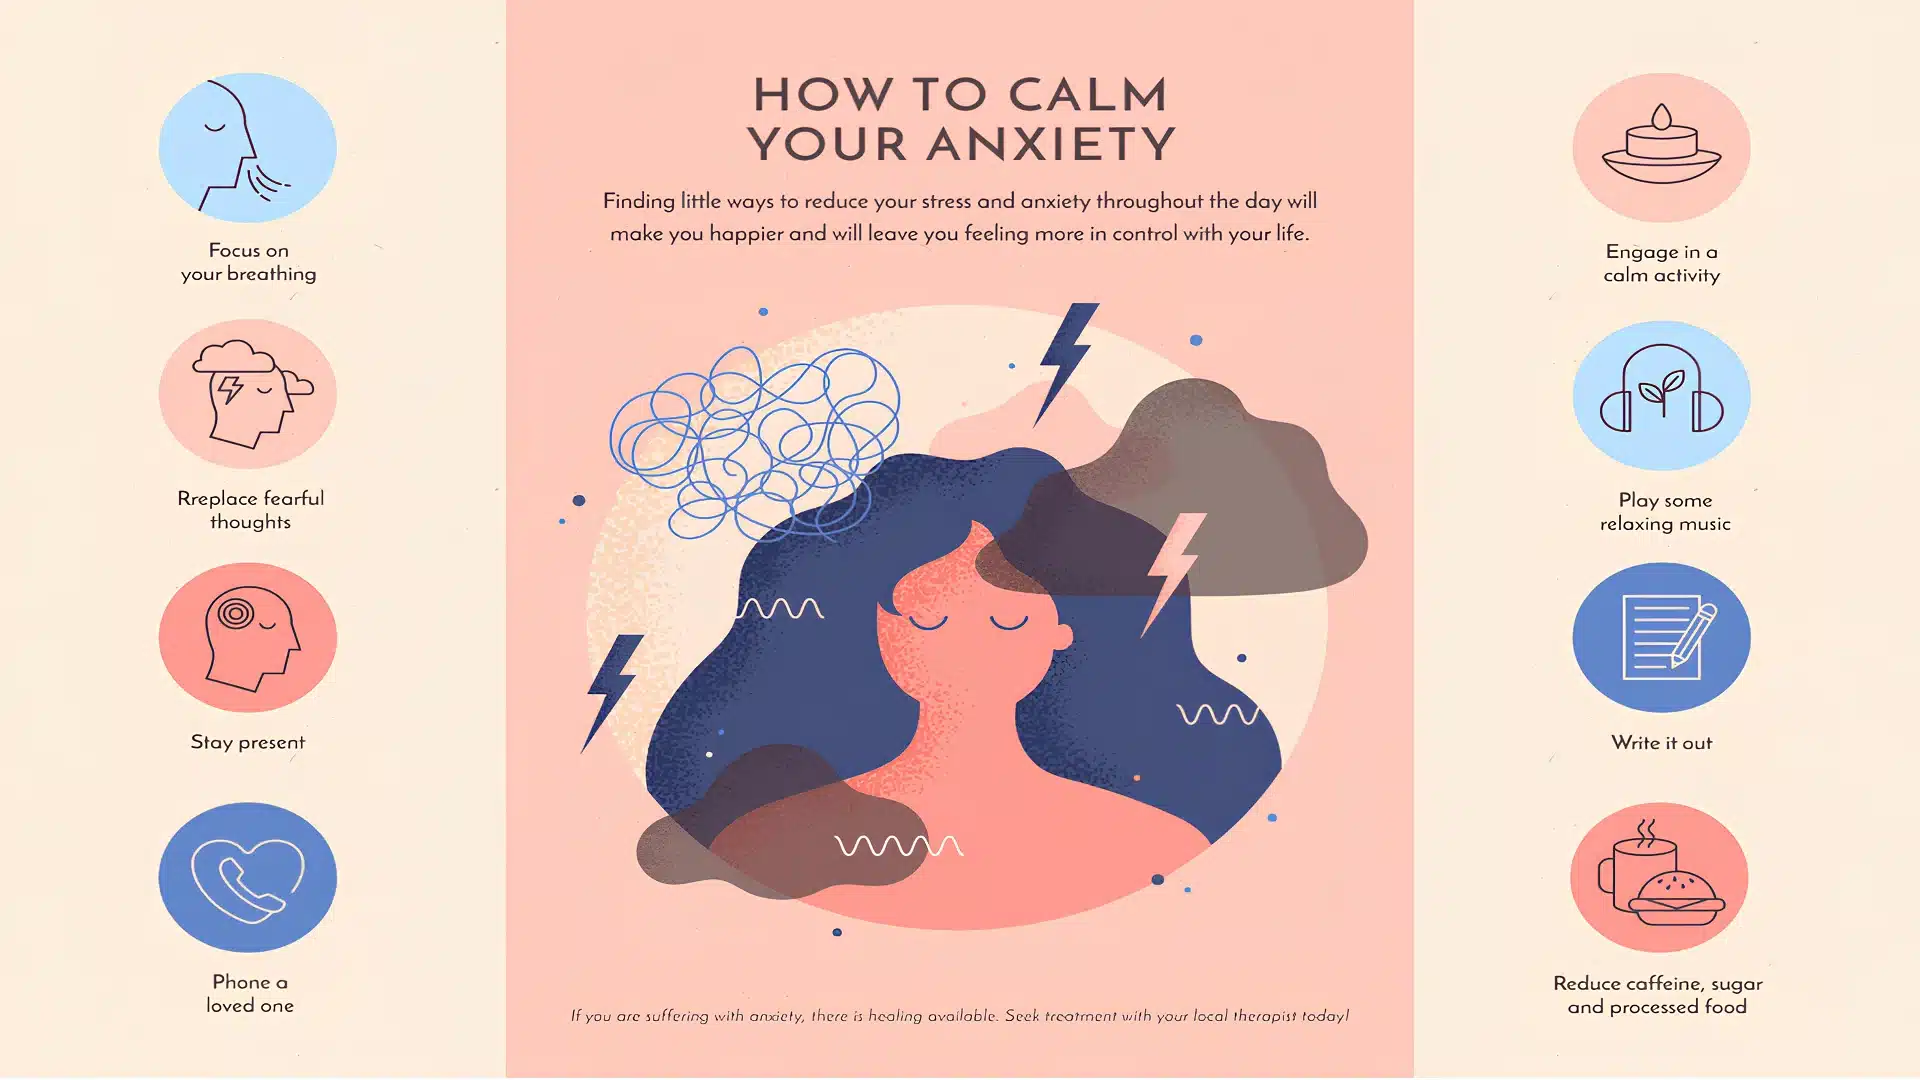 Illustration titled 'How to Calm Your Anxiety' shows tips for reducing anxiety, such as focusing on breathing, replacing fearful thoughts, staying present, engaging in calm activities, playing relaxing music, writing it out, phoning a loved one, and reducing caffeine, sugar, and processed food. The central image depicts a person with blue hair surrounded by clouds and lightning, representing anxiety, with encouraging text suggesting finding small ways to reduce stress throughout the day.